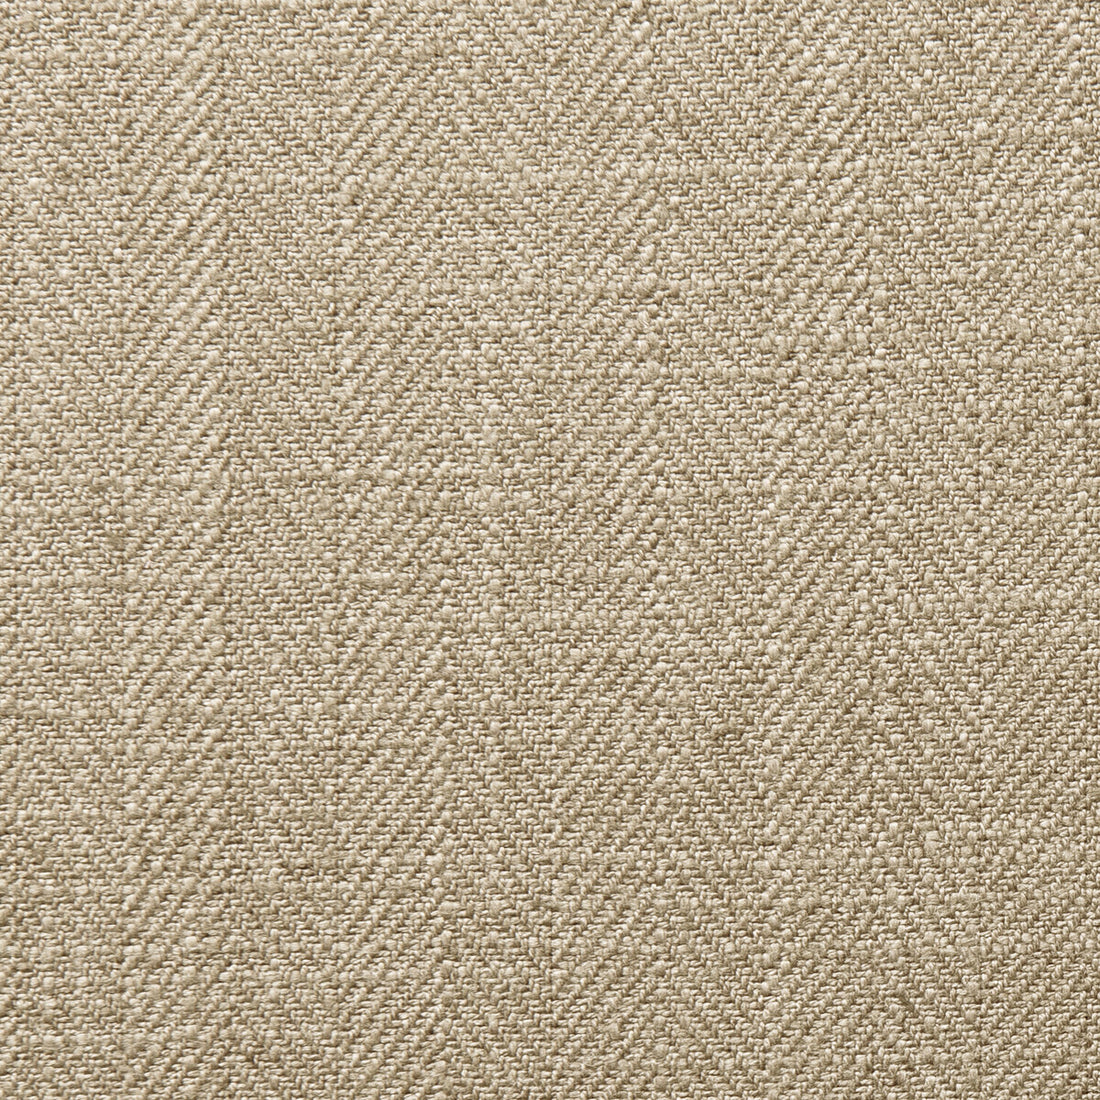 Henley fabric in latte color - pattern F0648/19.CAC.0 - by Clarke And Clarke in the Clarke &amp; Clarke Henley collection